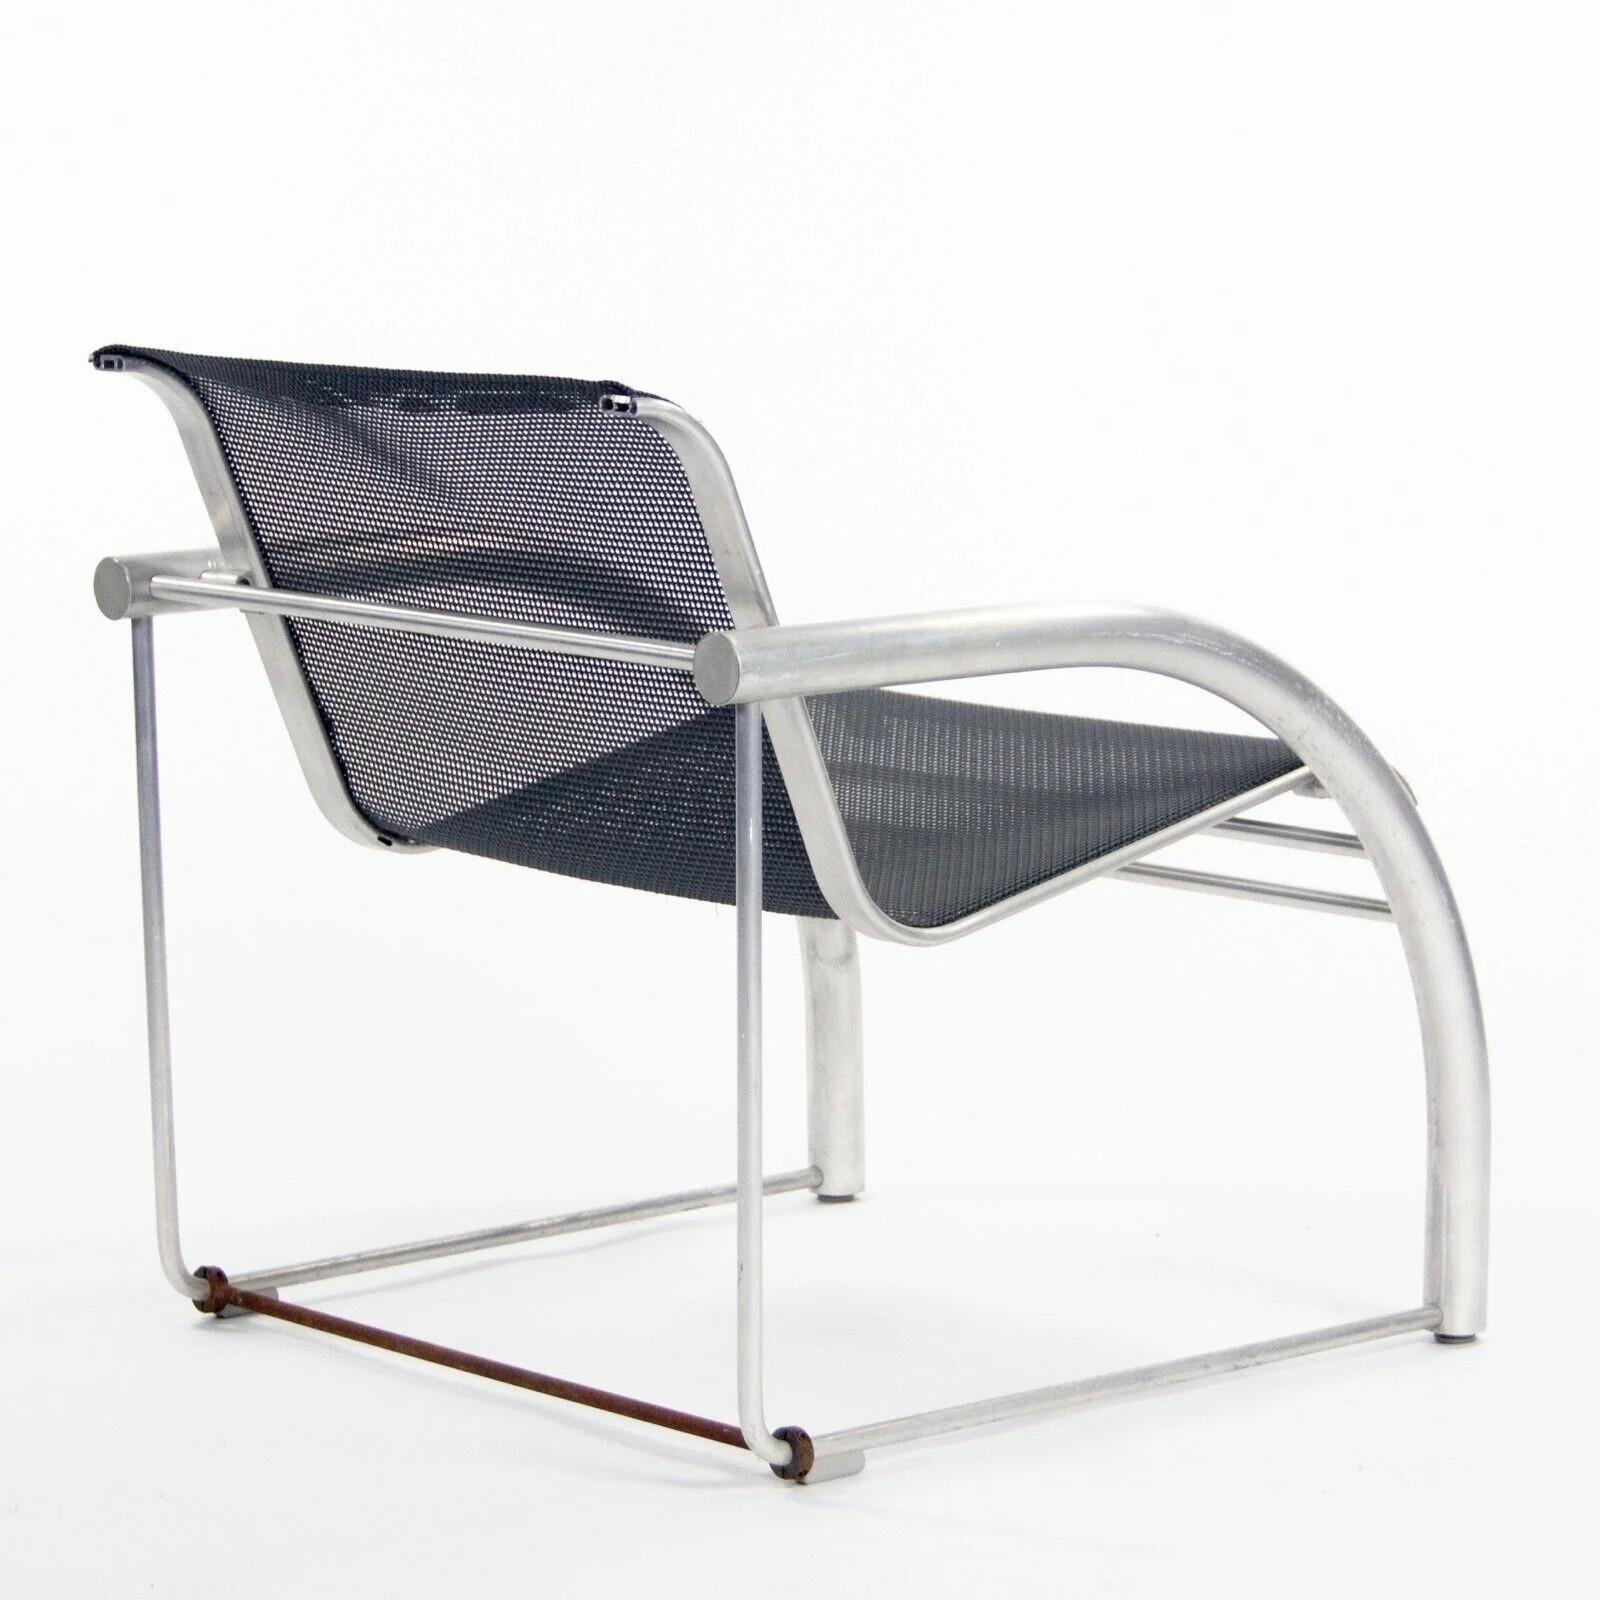 American 2011 Prototype Richard Schultz Mateo Collection Raw Aluminum & Mesh Dining Chair For Sale